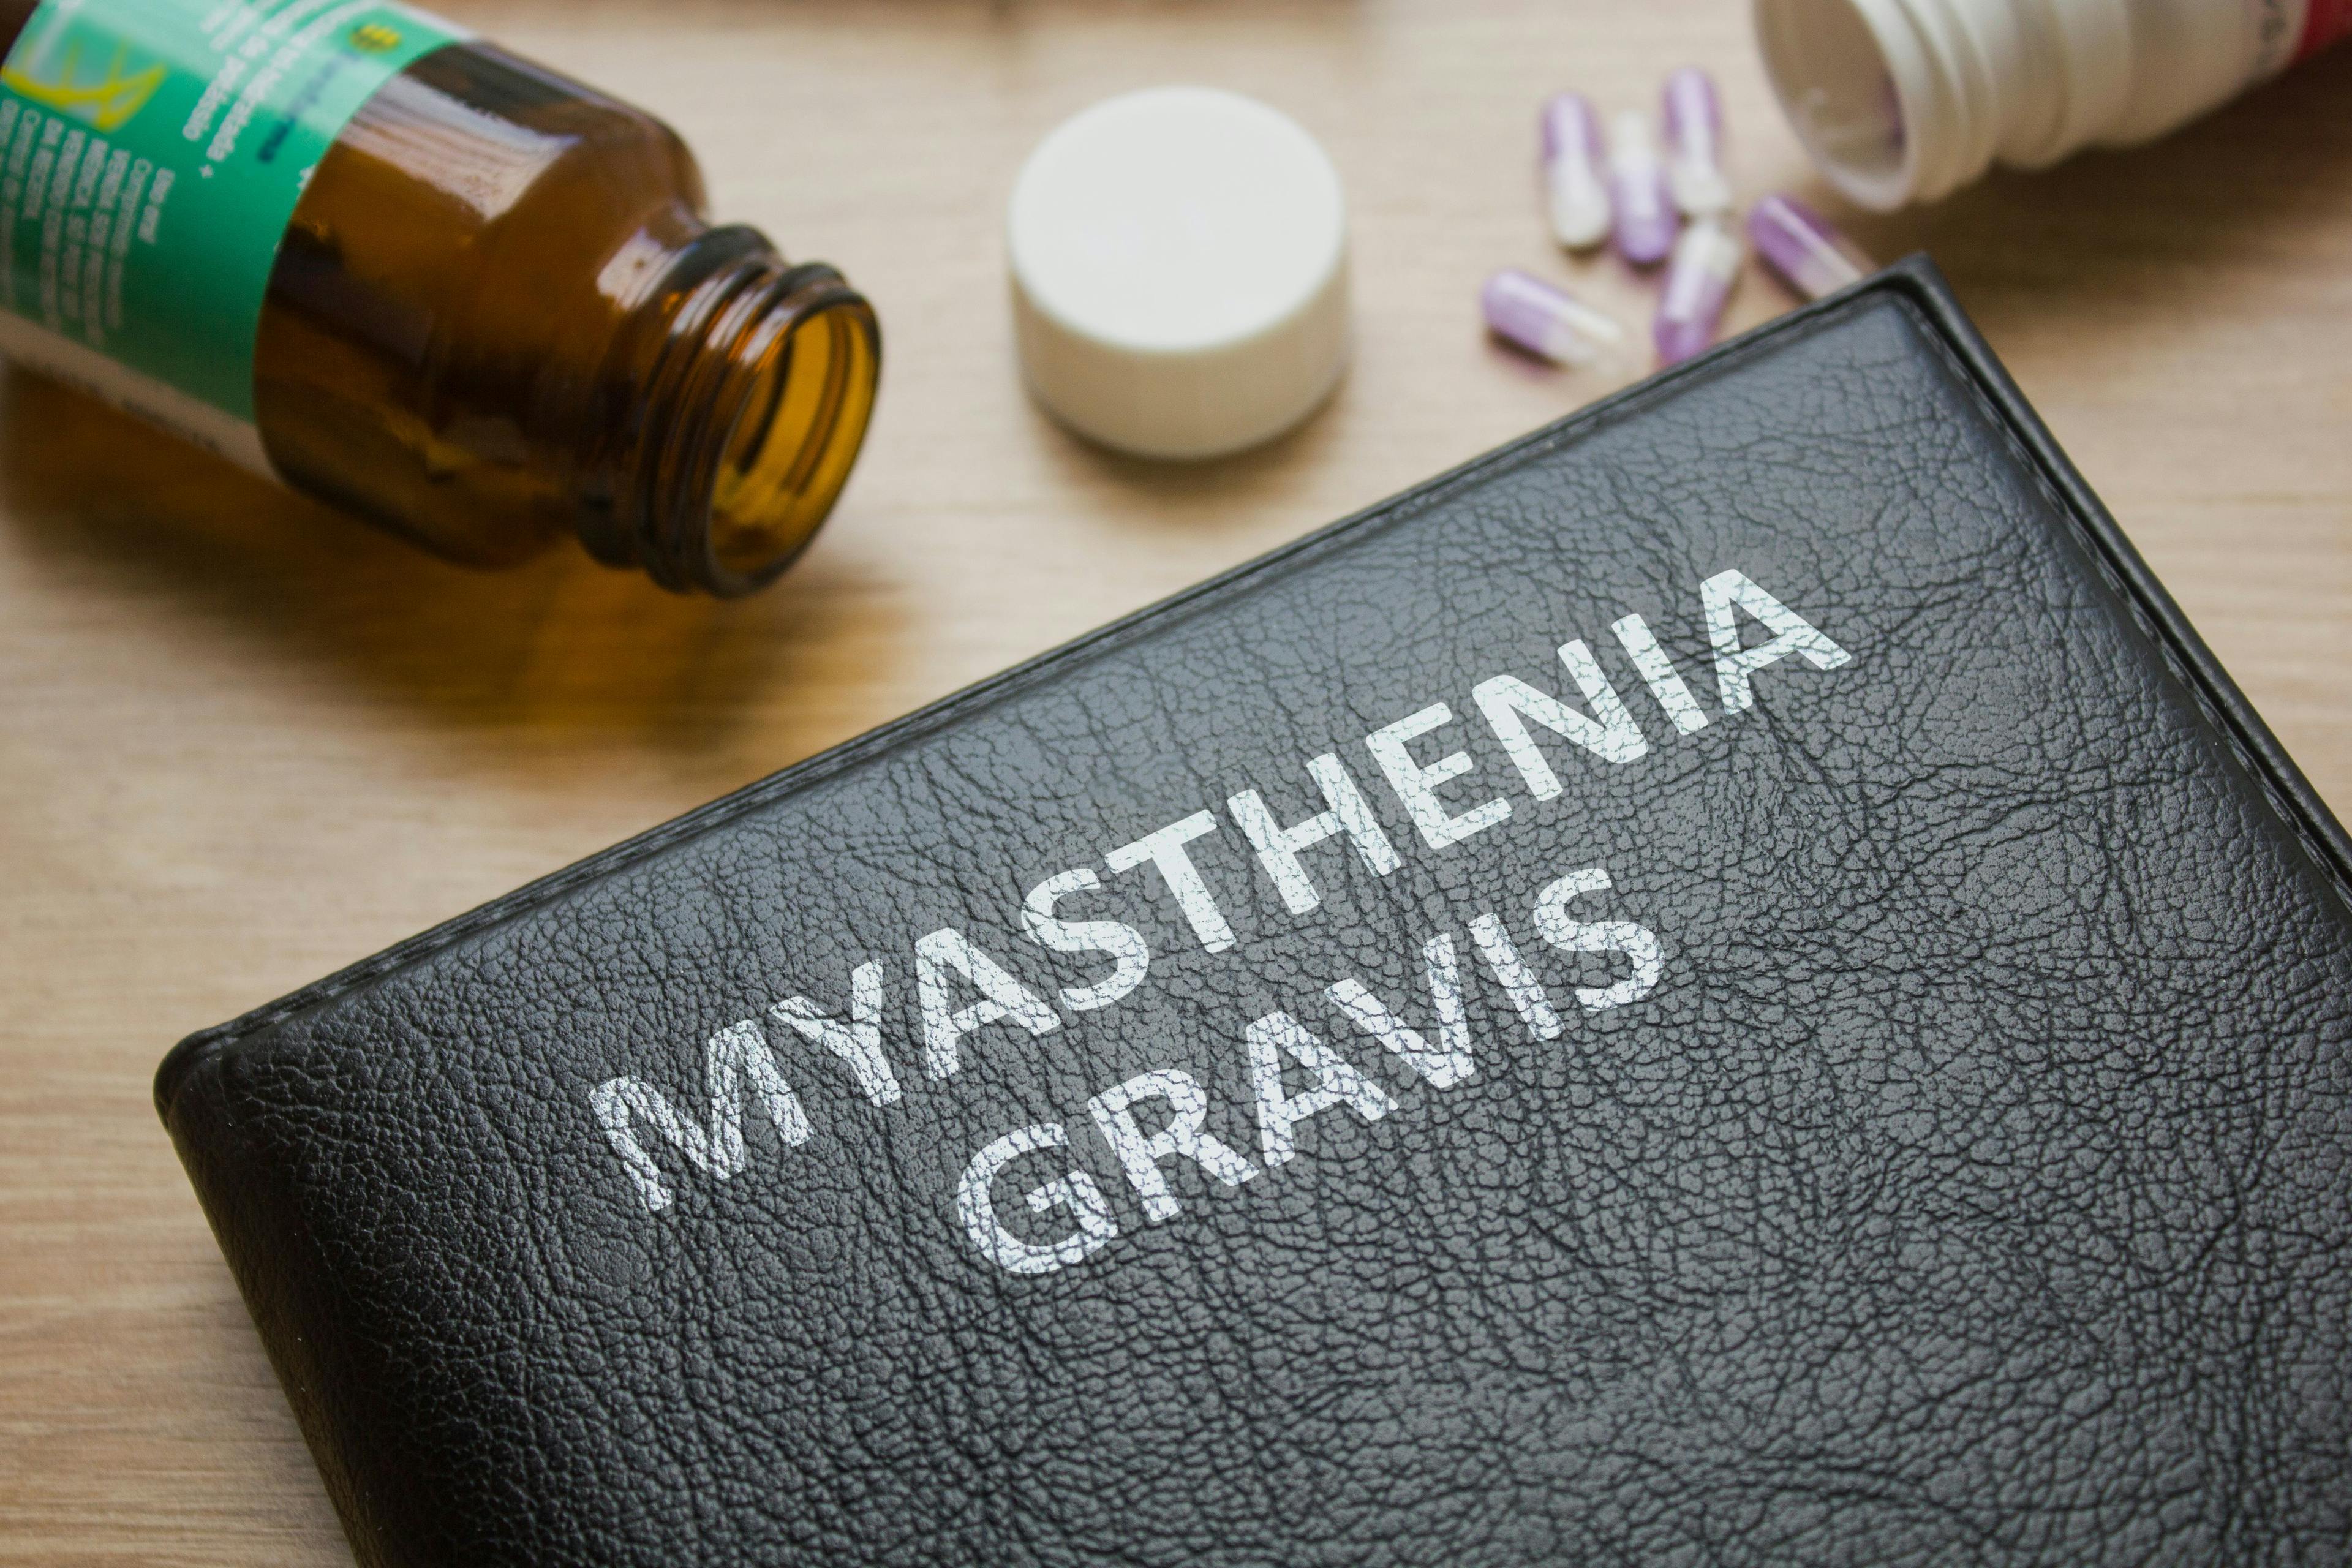 Book about Myasthenia gravis and medication, injection, syringe and pills:Black book | Image Credit: mdaros - stock.adobe.com